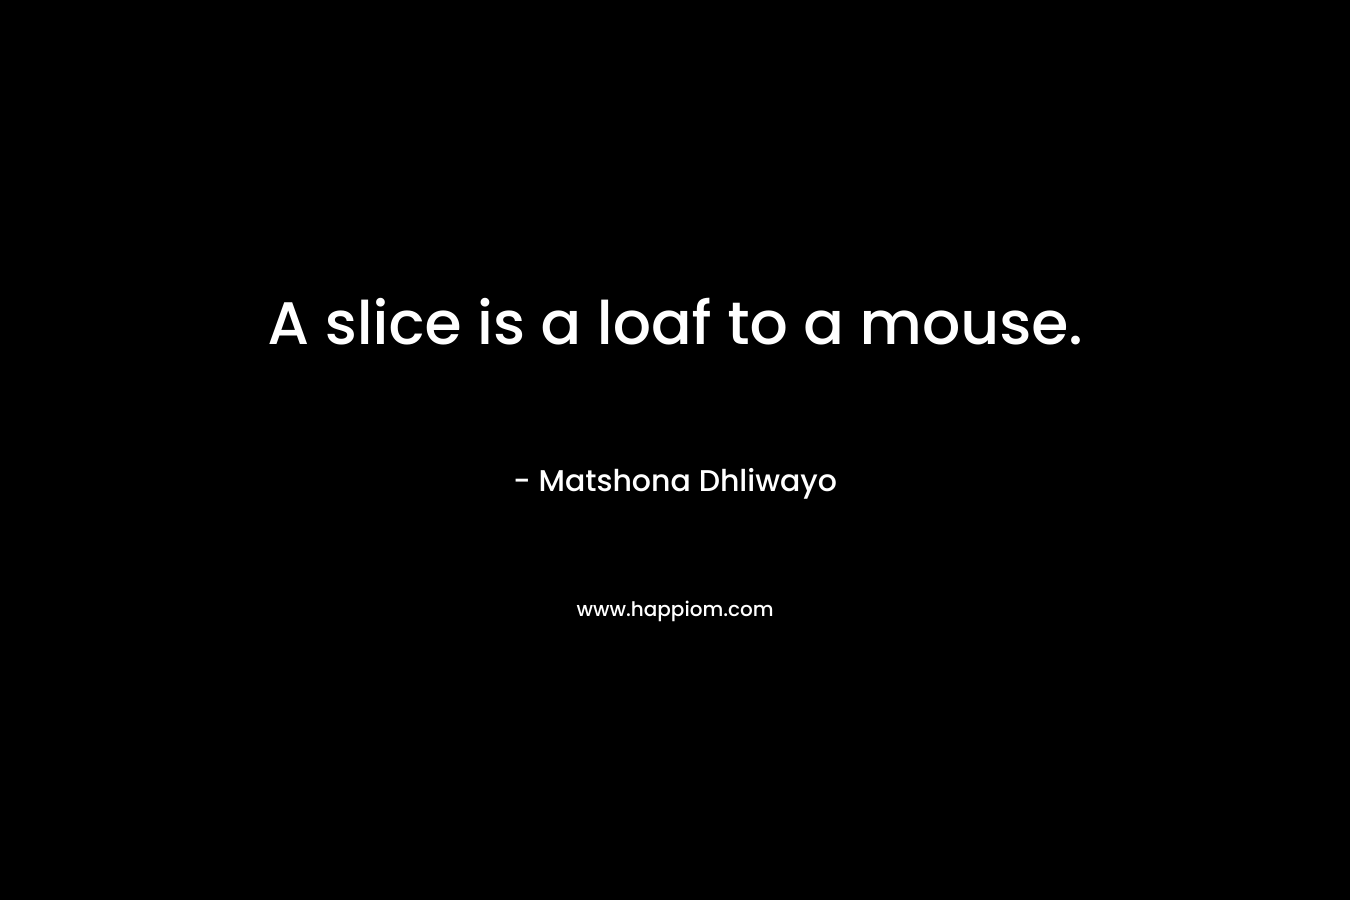 A slice is a loaf to a mouse. – Matshona Dhliwayo